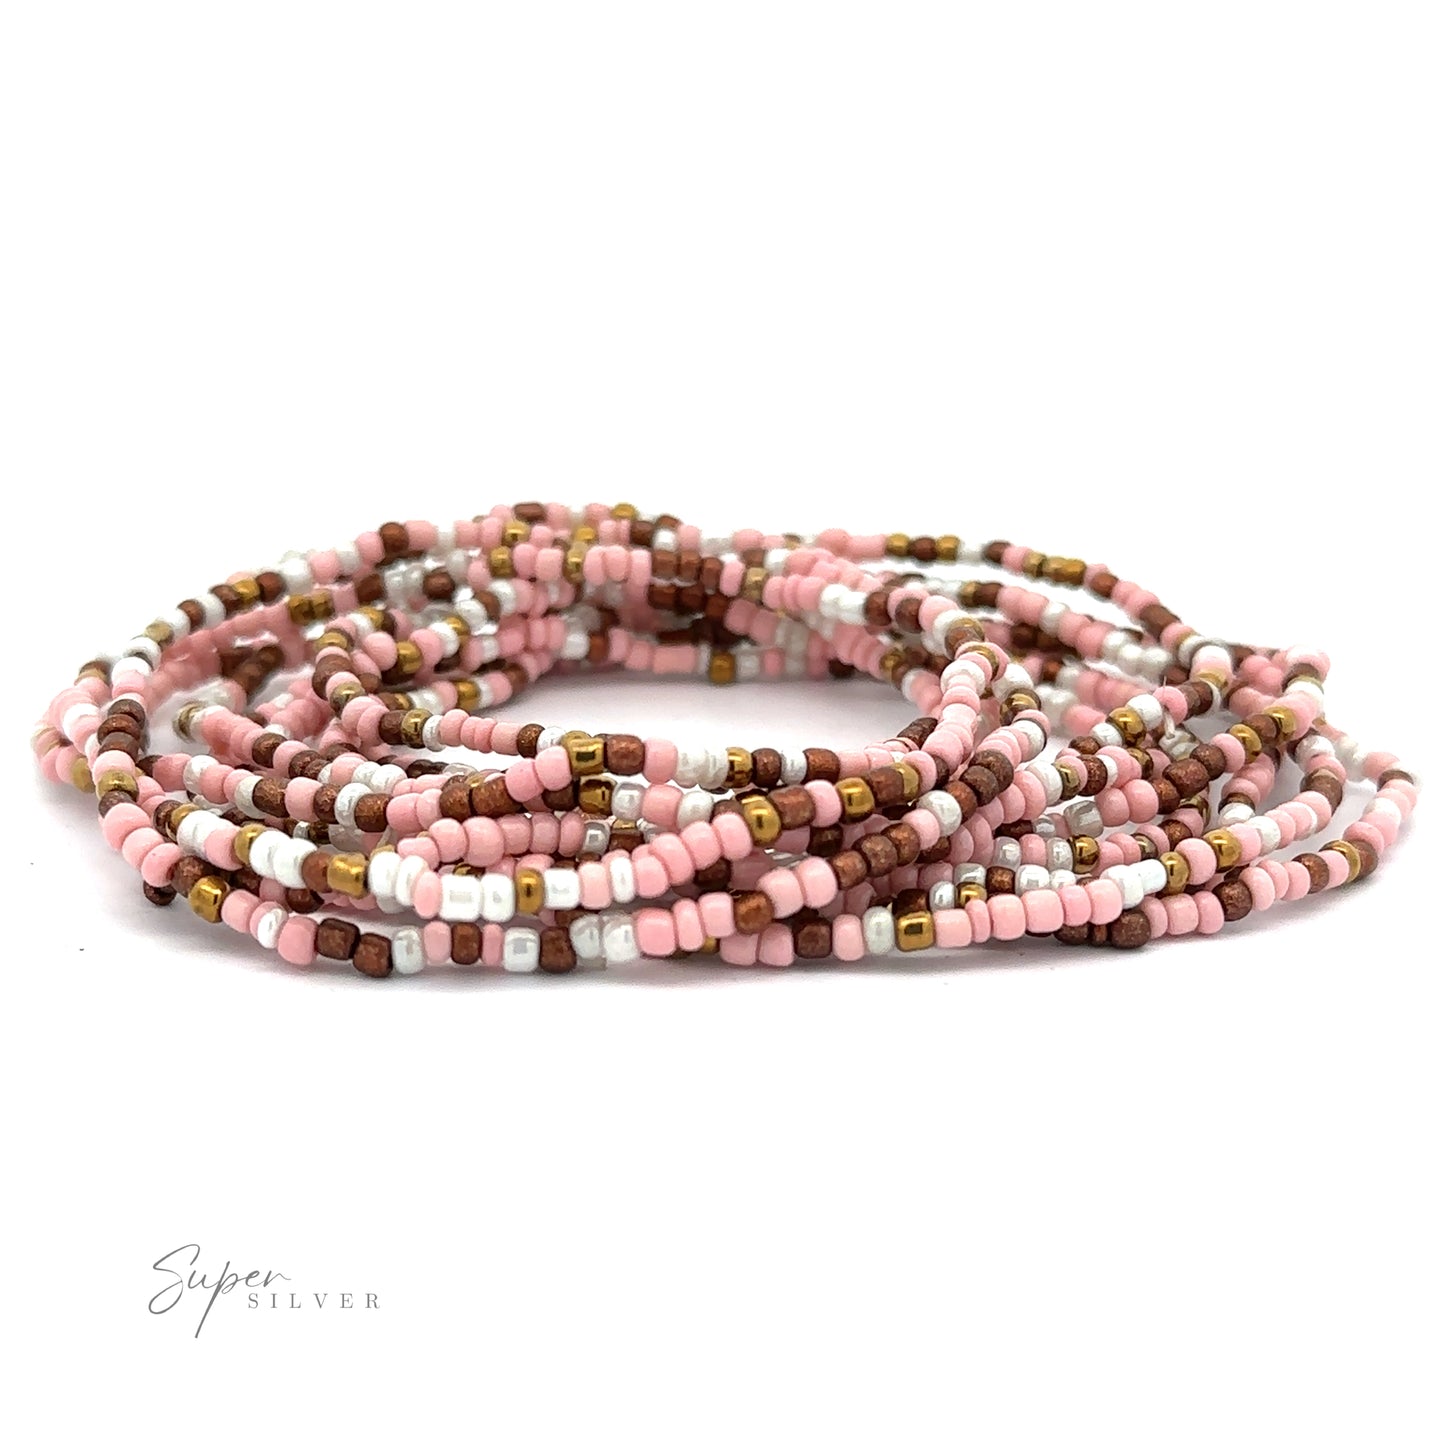 
                  
                    A coiled strand of Dainty Beaded Bracelets in shades of pink, brown, white, and gold, arranged in a loop against a white background. The "Super Silver" logo is visible in the bottom left corner.
                  
                